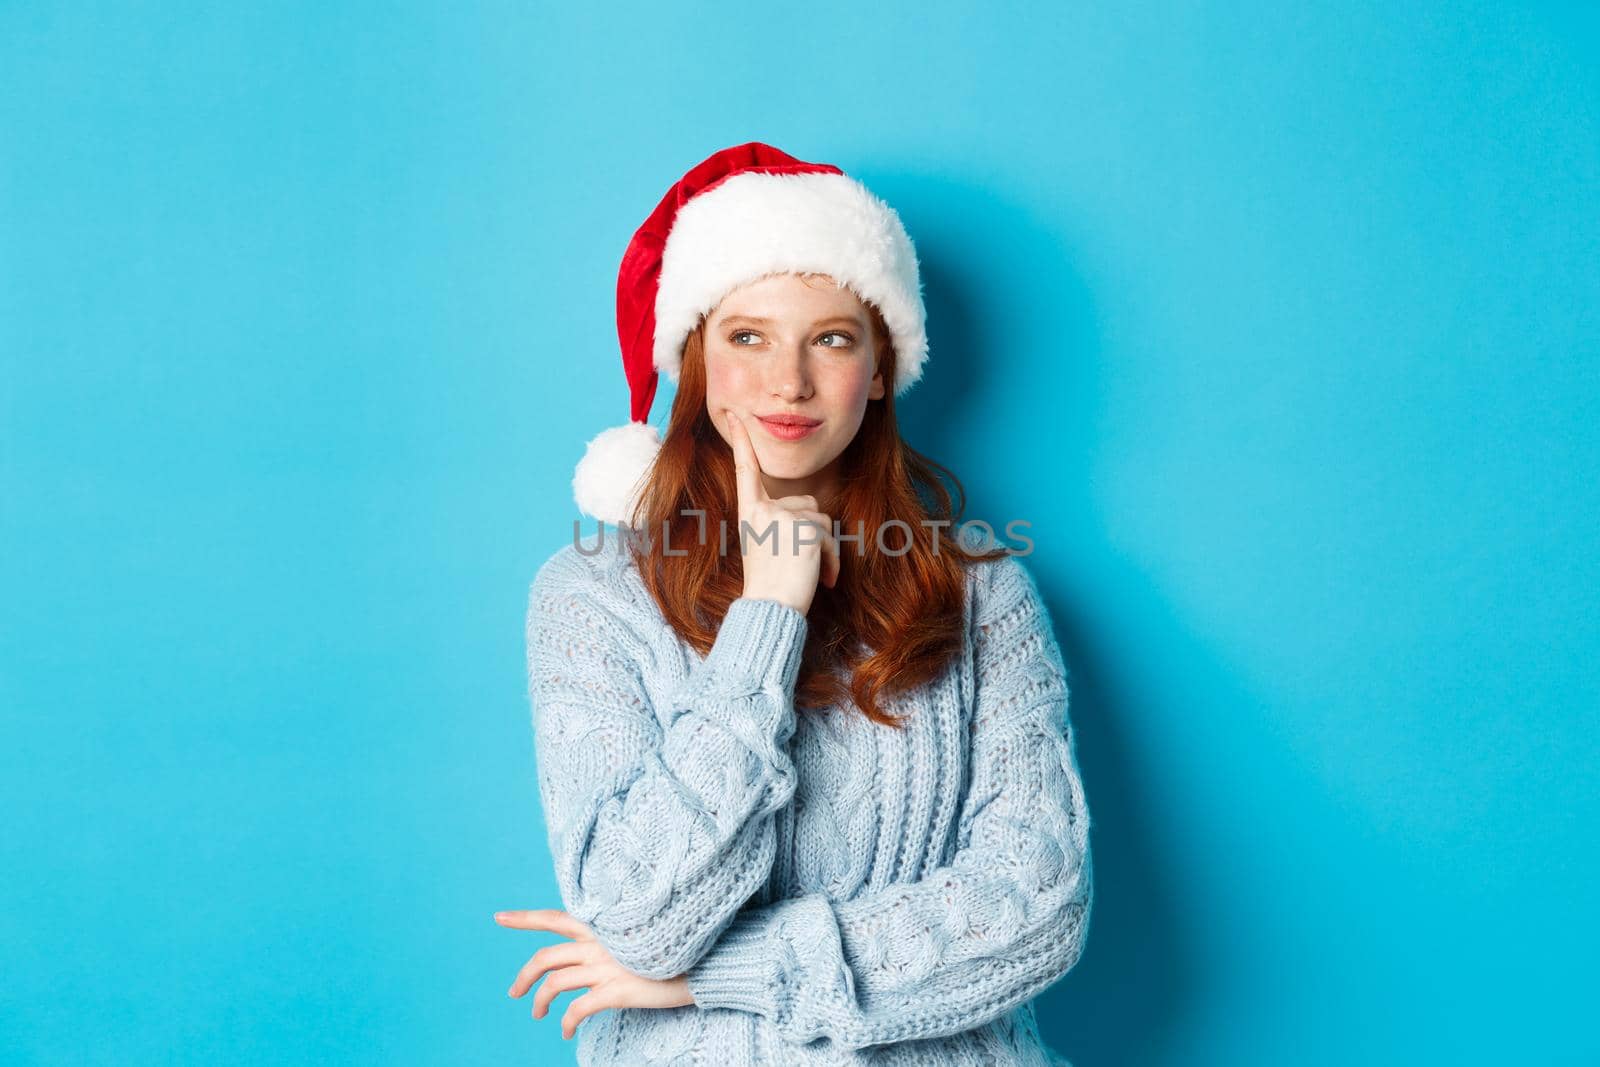 Winter holidays and Christmas Eve concept. Silly redhead girl with freckles, wearing santa hat and thinking, planning New Year celebration, standing over blue background.